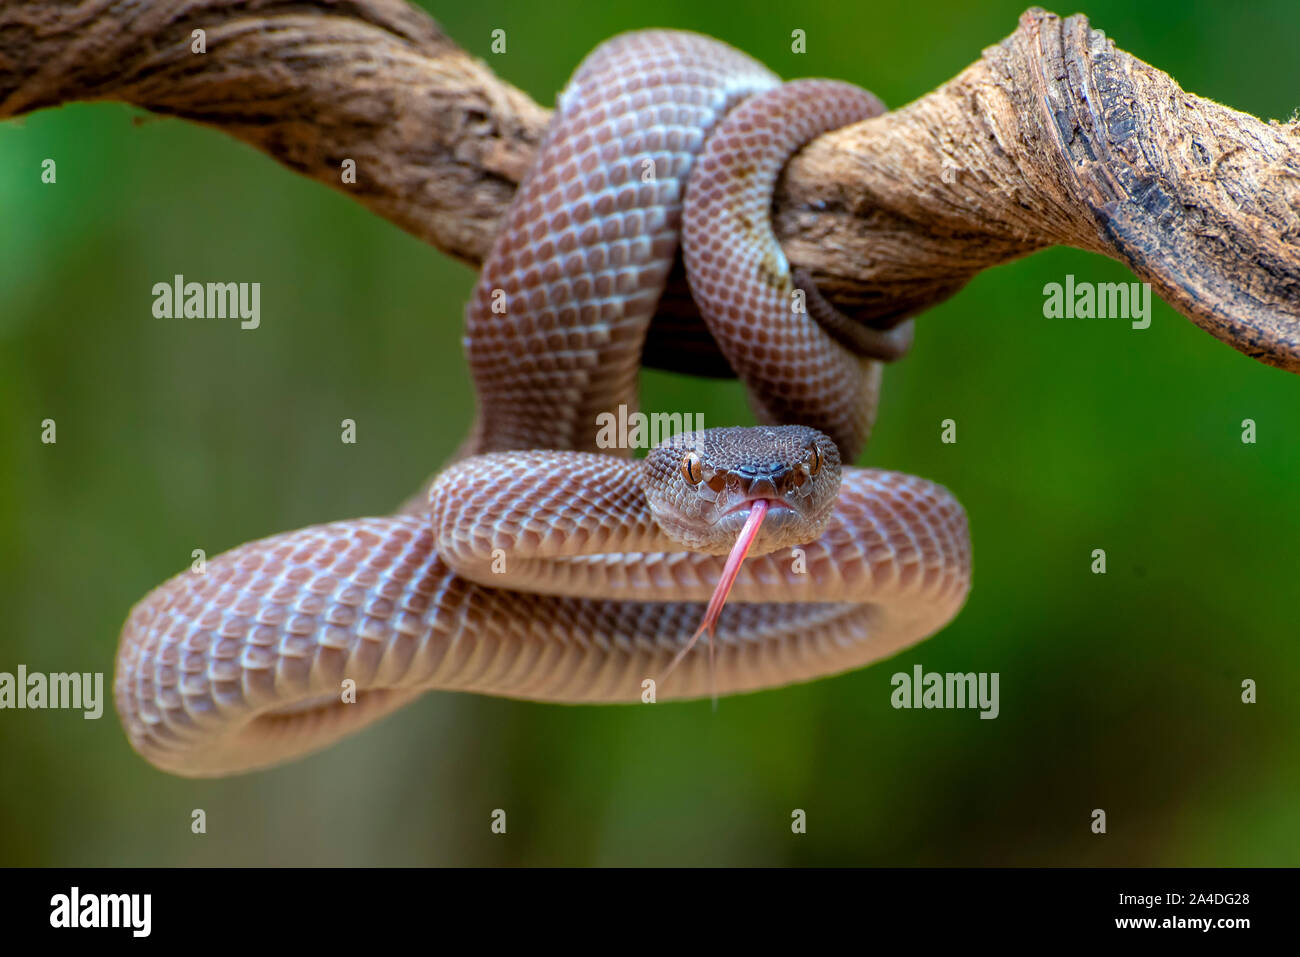 Mangrove pit viper on a branch, Indonesia Stock Photo